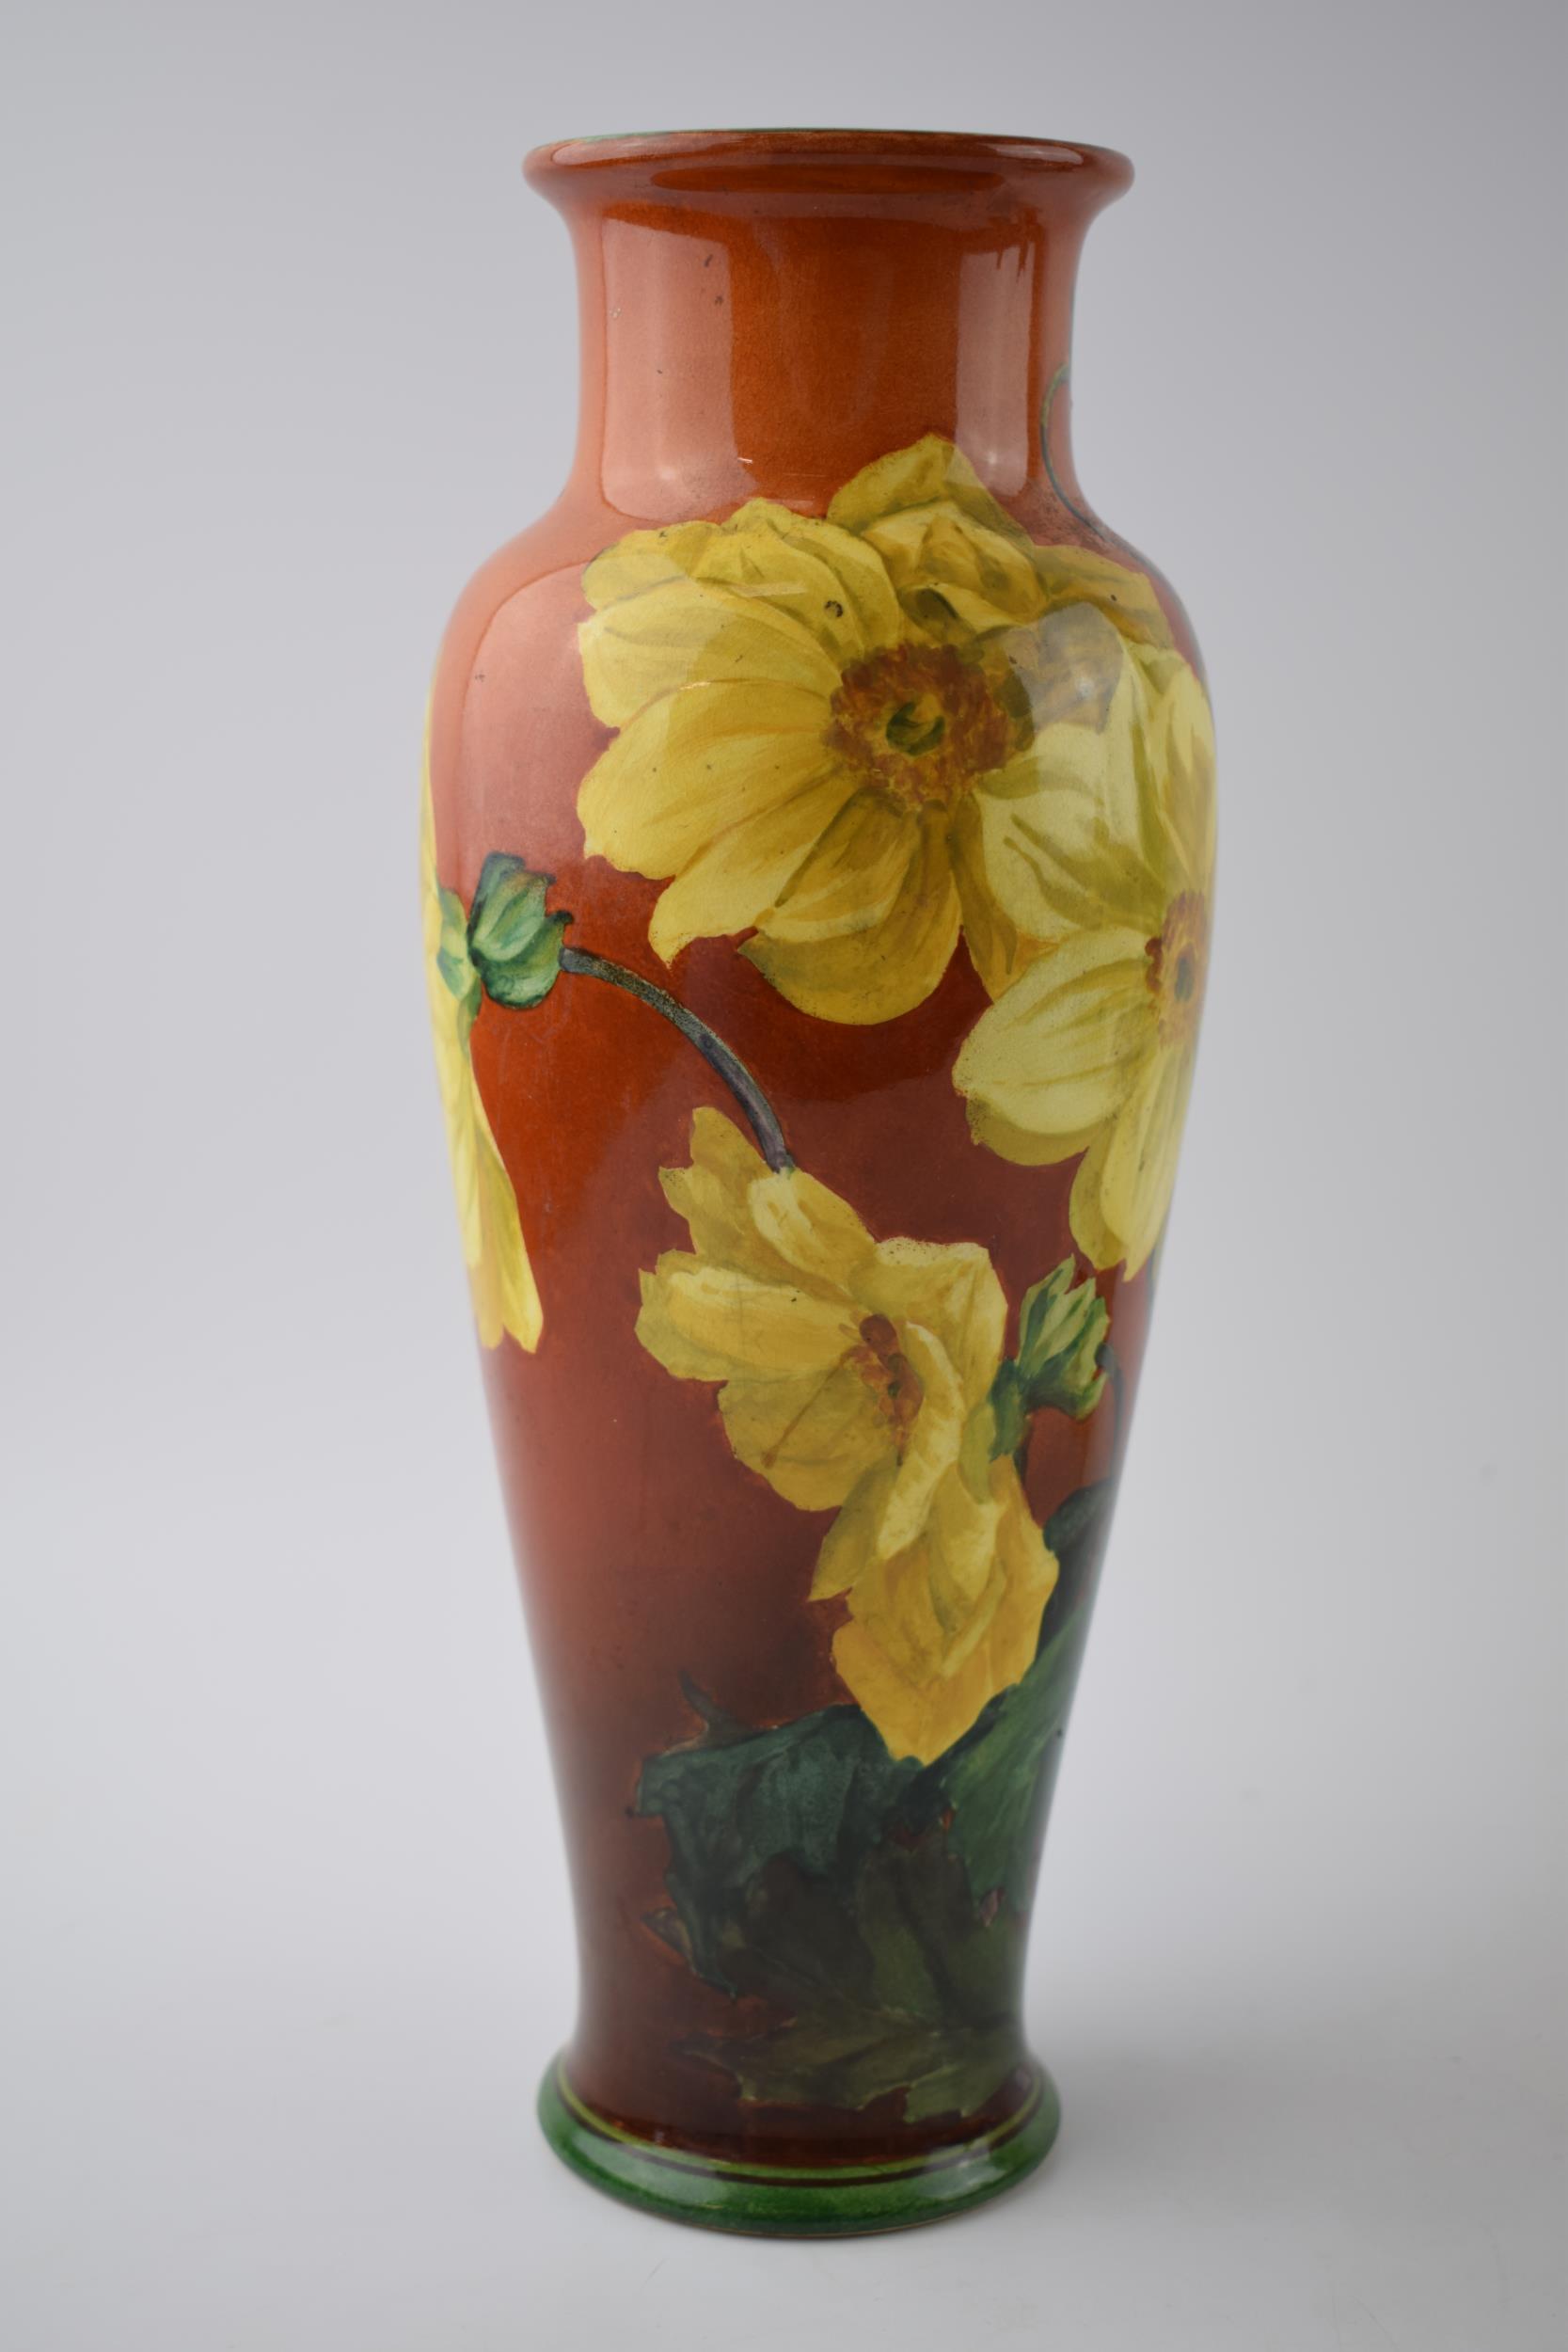 Doulton Lambeth Faience high-shouldered vase decorated with Daffodils on red / deep orange - Image 2 of 4